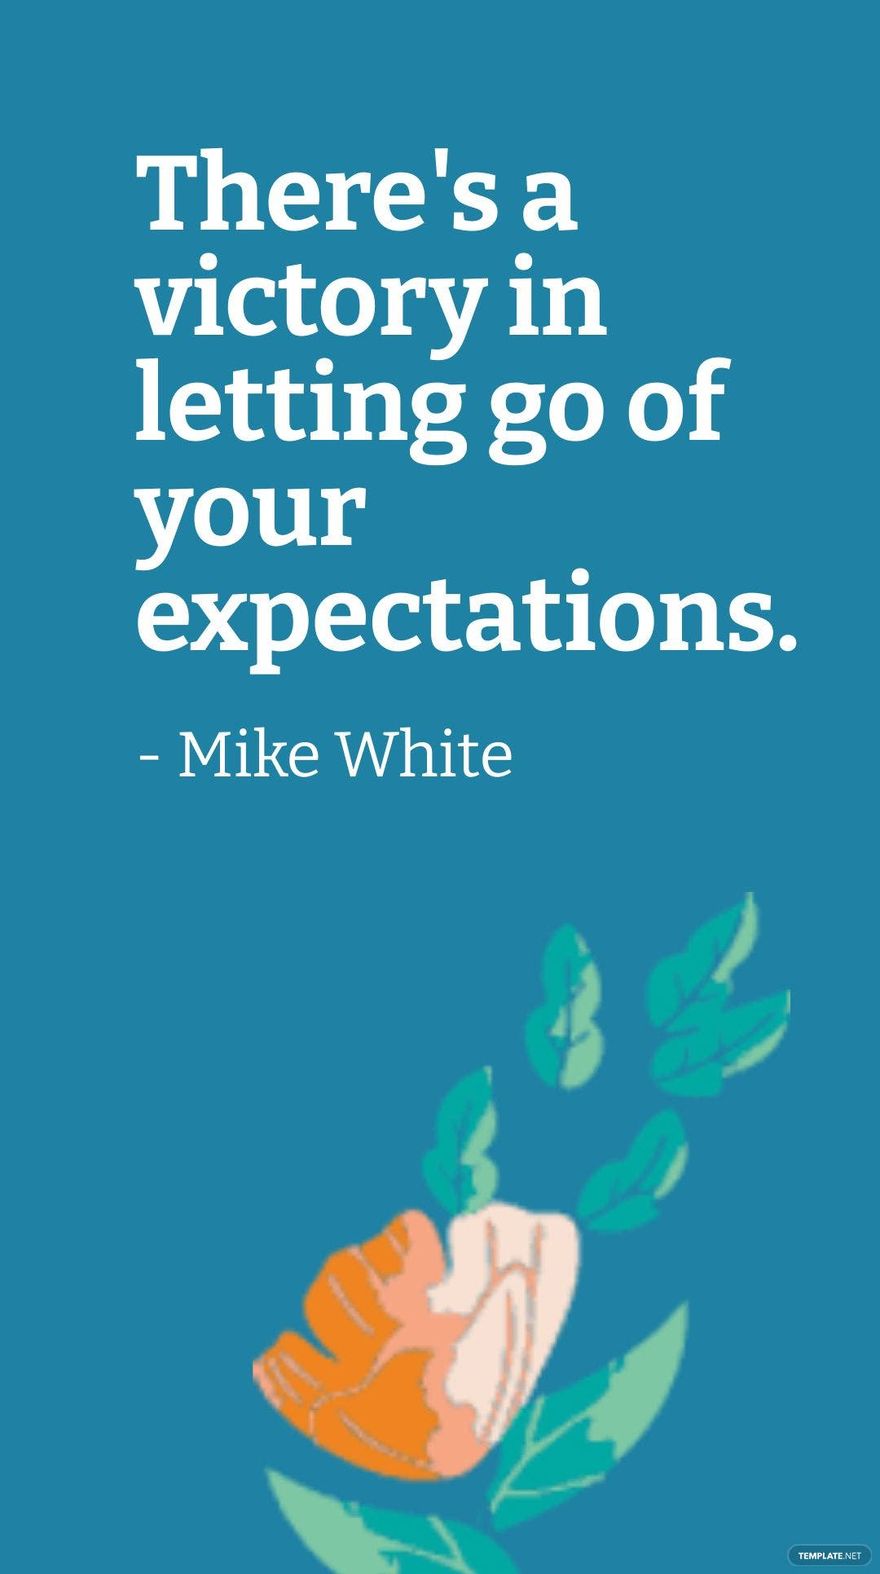 Mike White- There's a victory in letting go of your expectations.